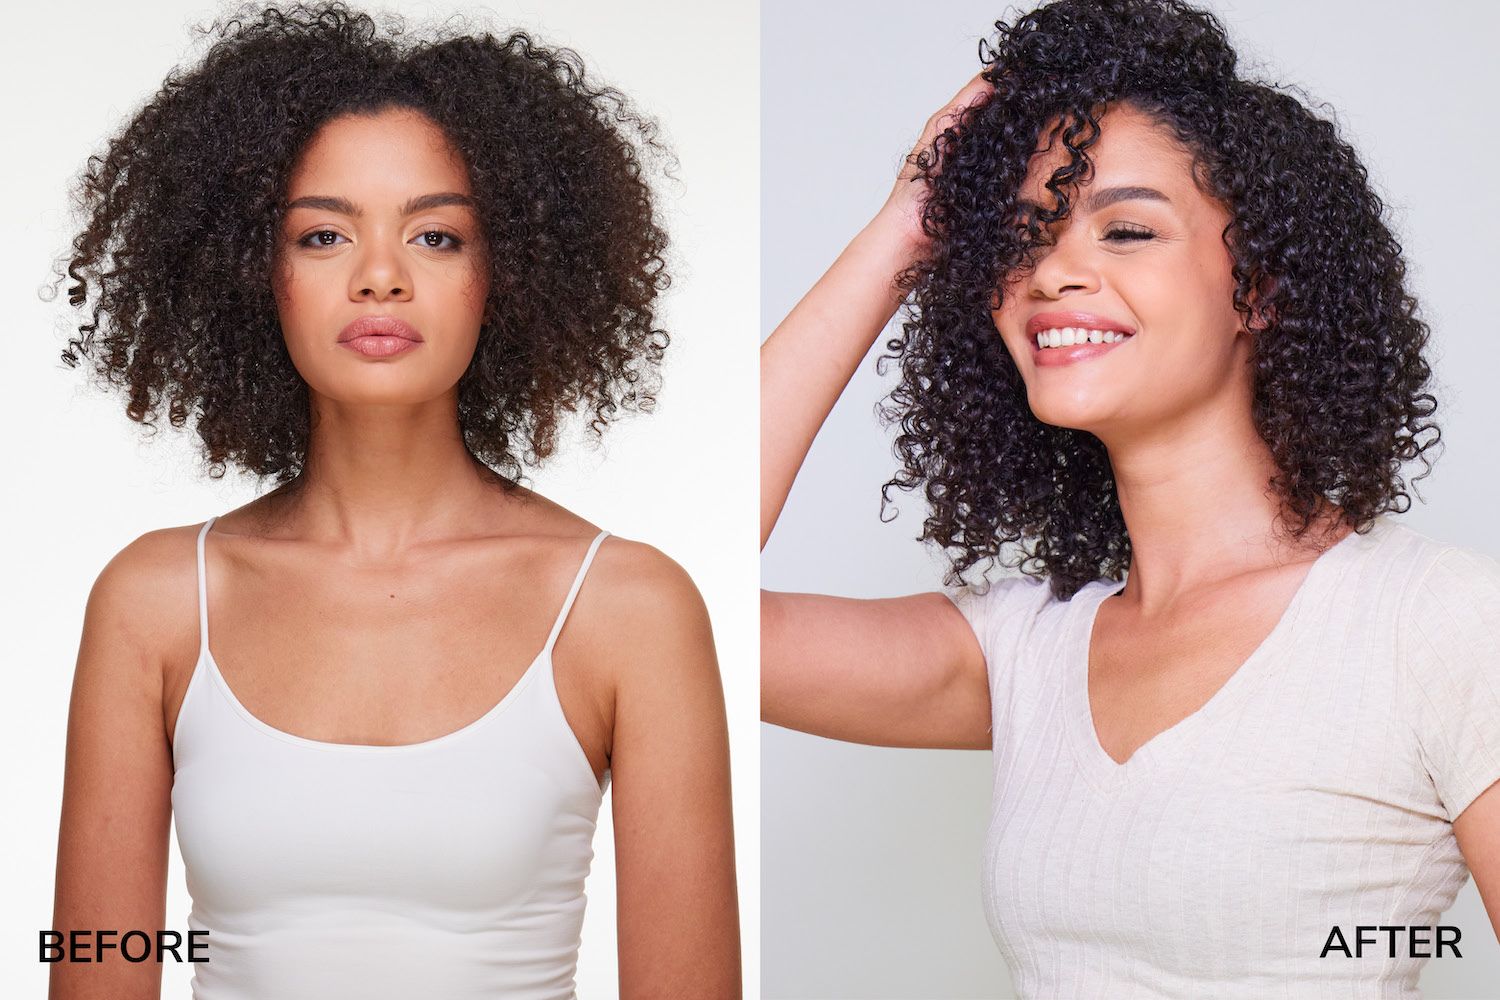 Before & after of a model with undefined, frizzy curls and then defined, glossy, frizz-free curls.